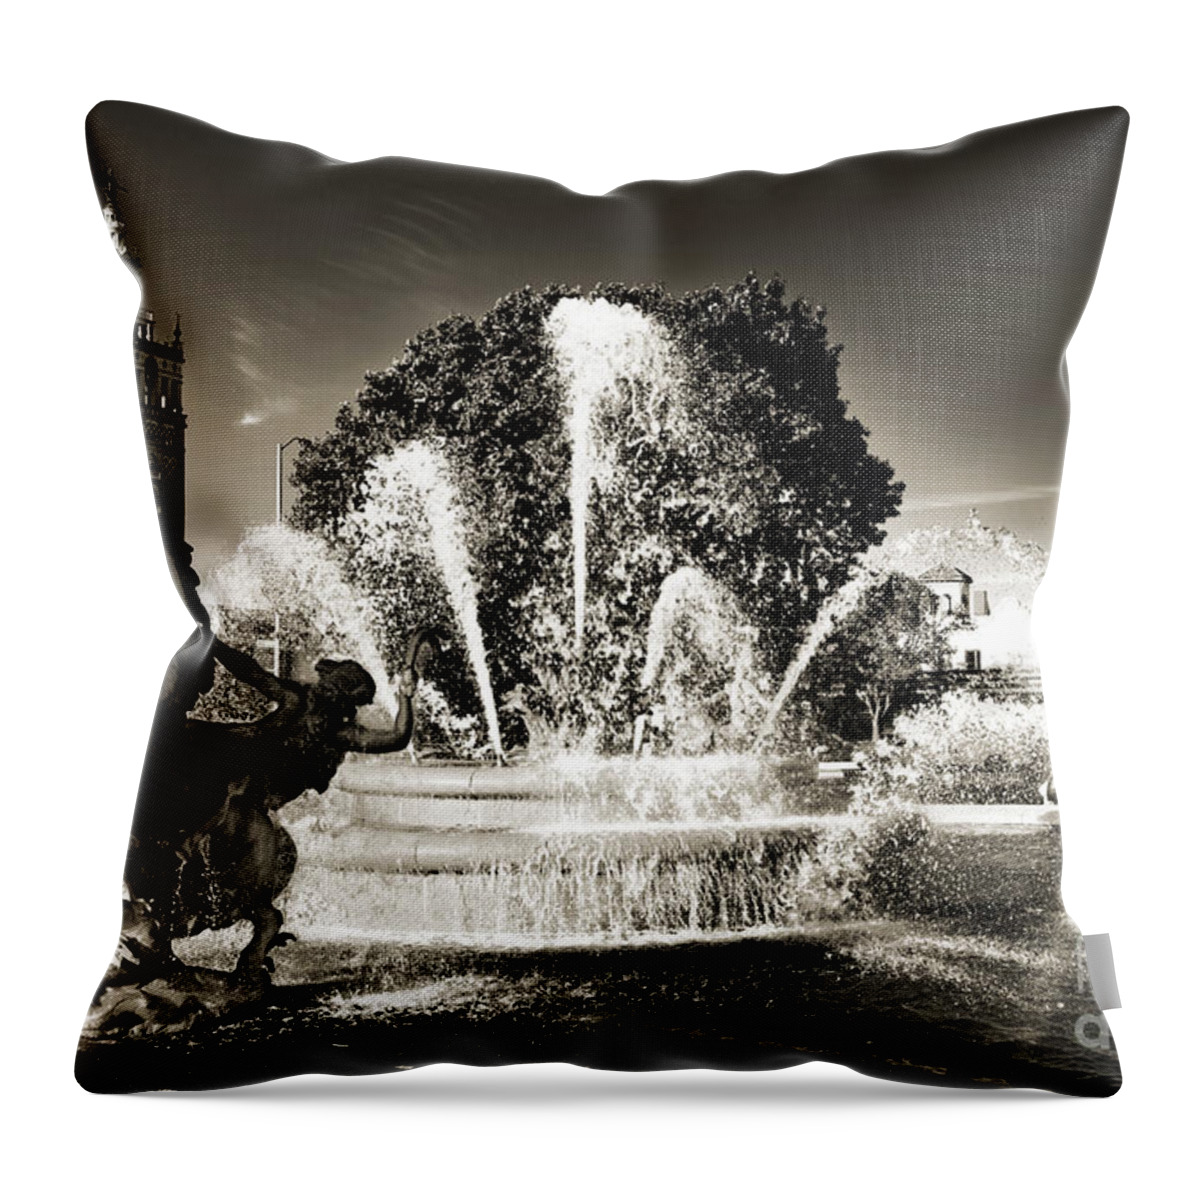 Kansas City Throw Pillow featuring the photograph JC Nichols Memorial Fountain BW 1 by Andee Design